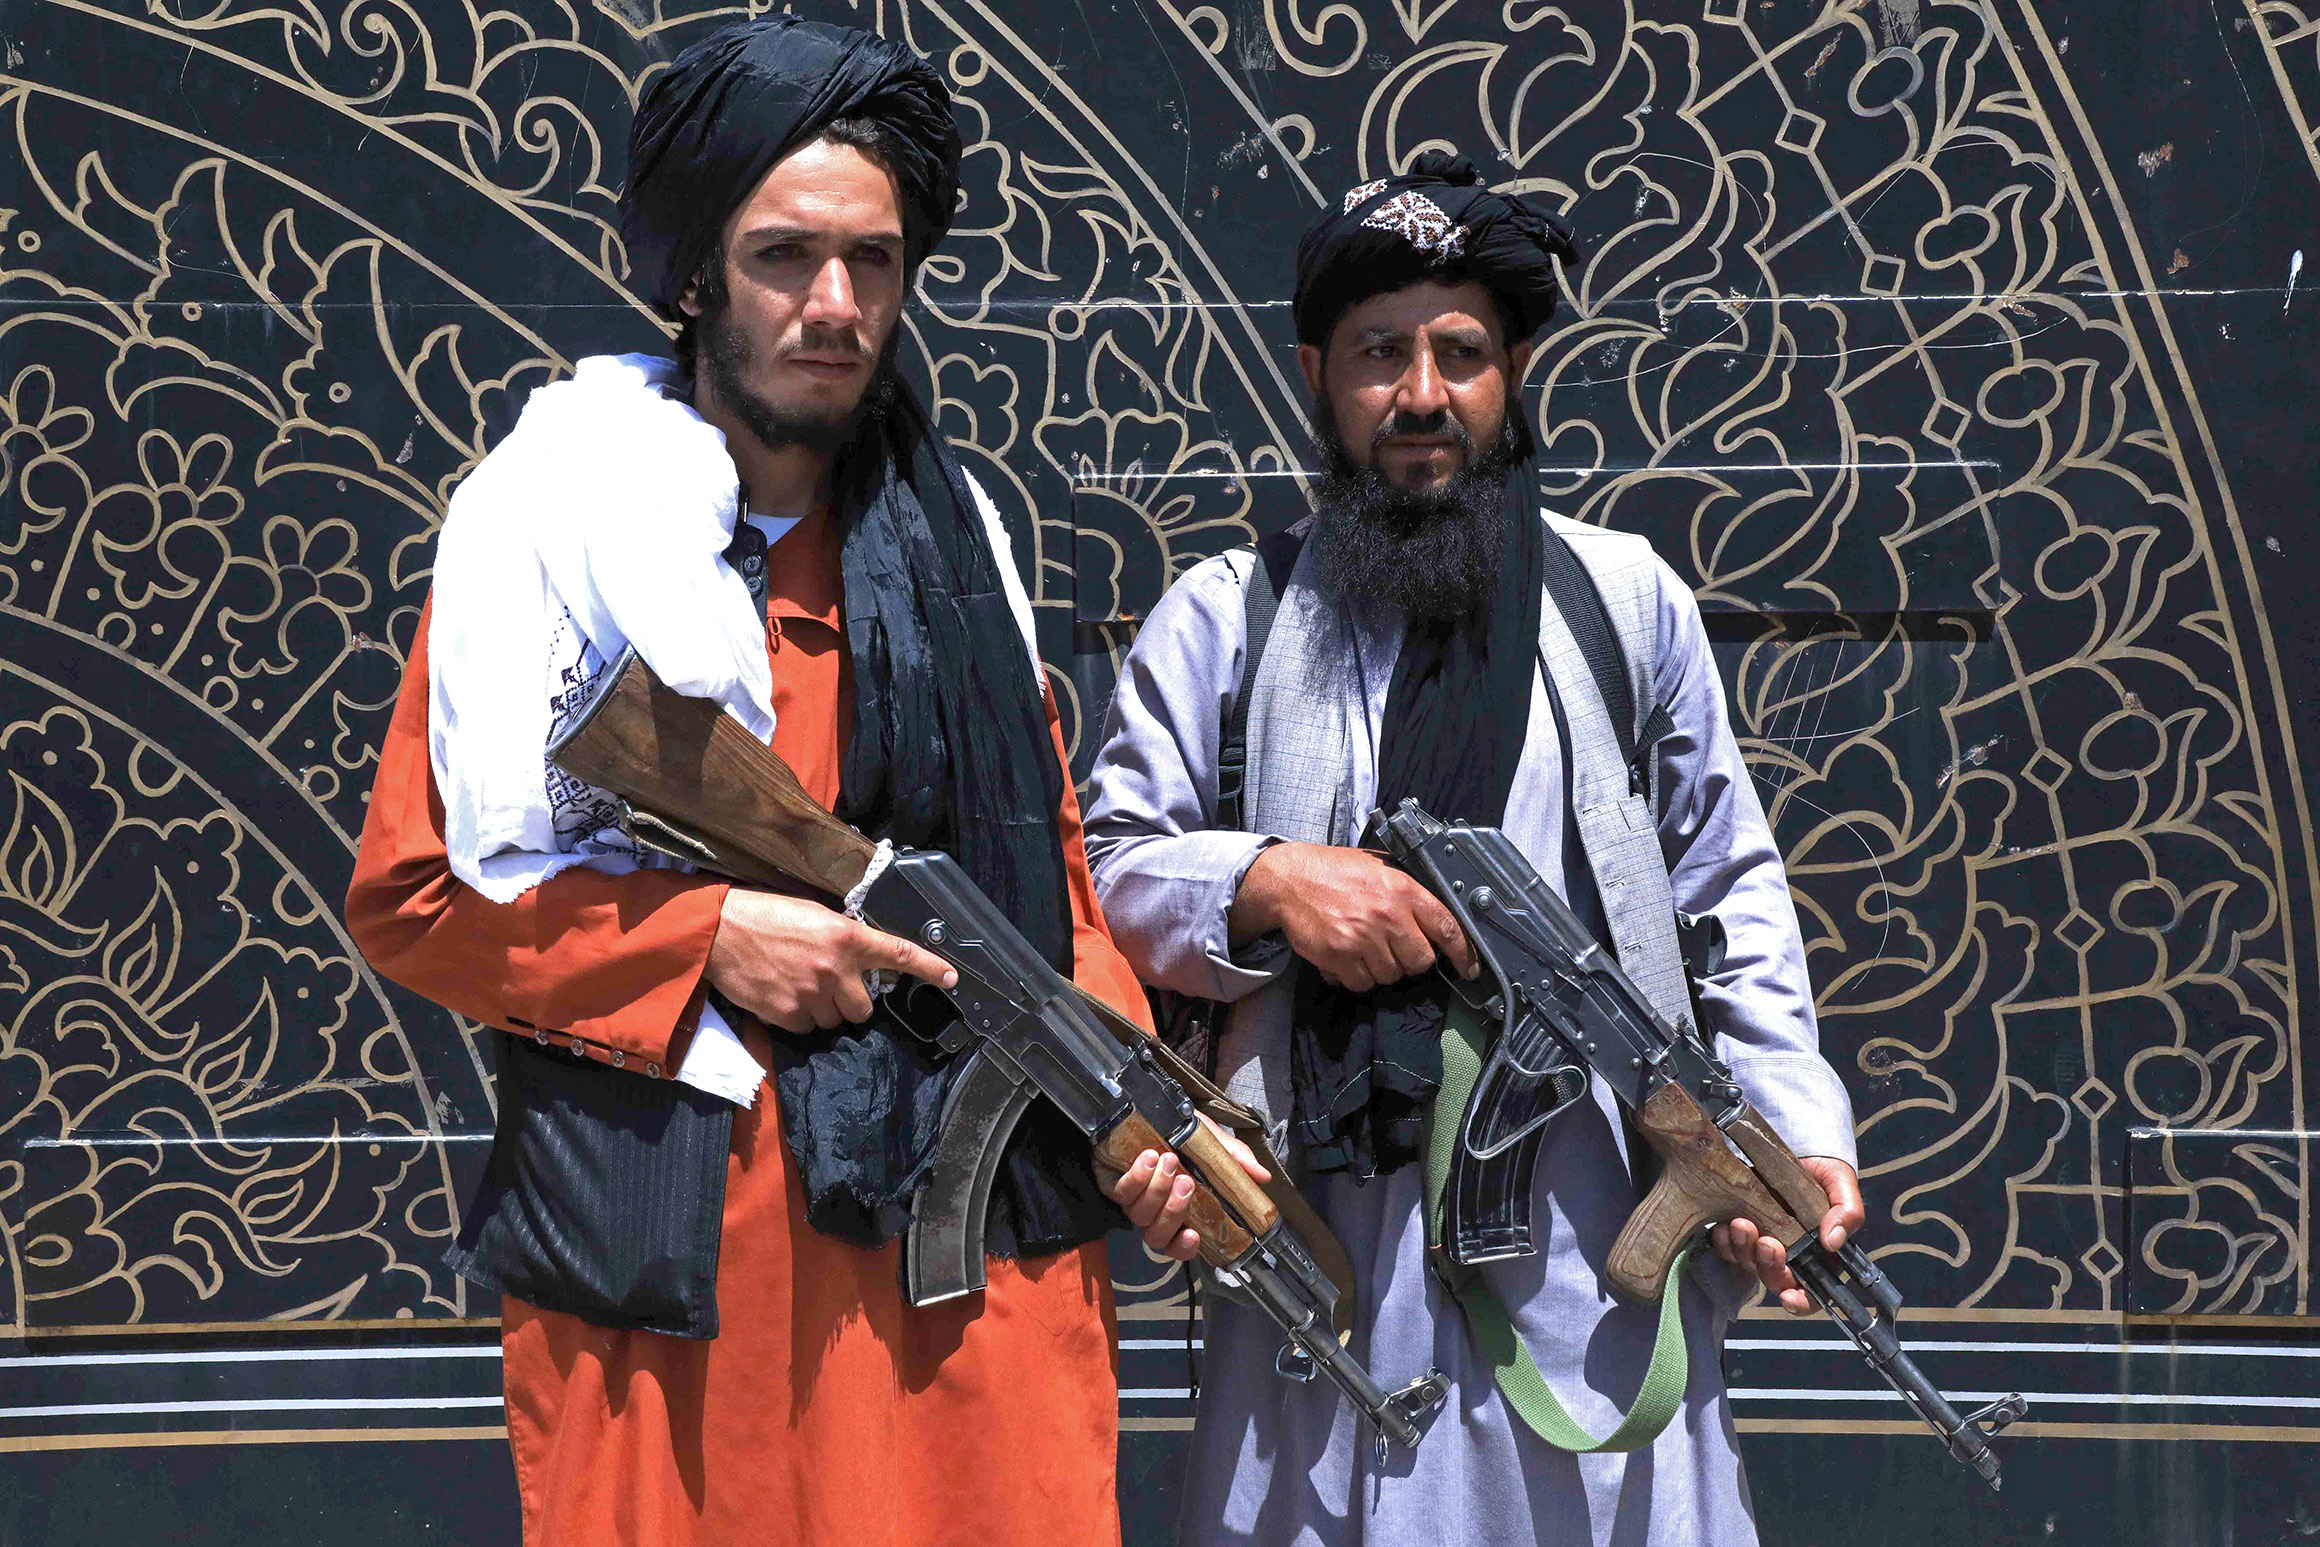 Taliban fighters stand guard in front of the provincial governor's office in Herat on August 14, 2021. (Photo by - / AFP) (Photo by -/AFP via Getty Images)